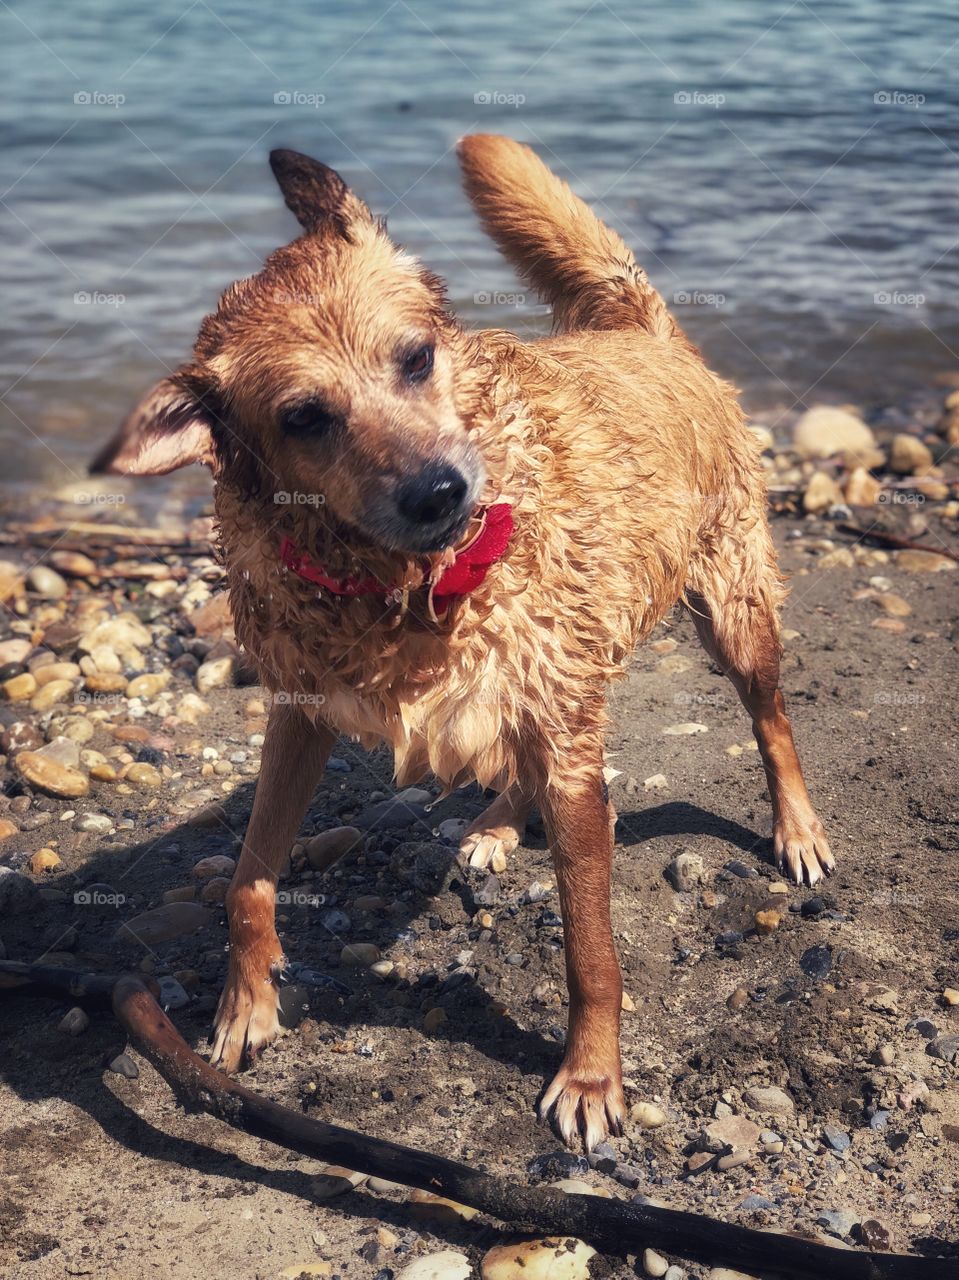 Wet dog shaking off water from playing in the lake. Red in fur colour standing on a rocky and samdy beach. Sun shining and dog looks silly. Cute red collar. 